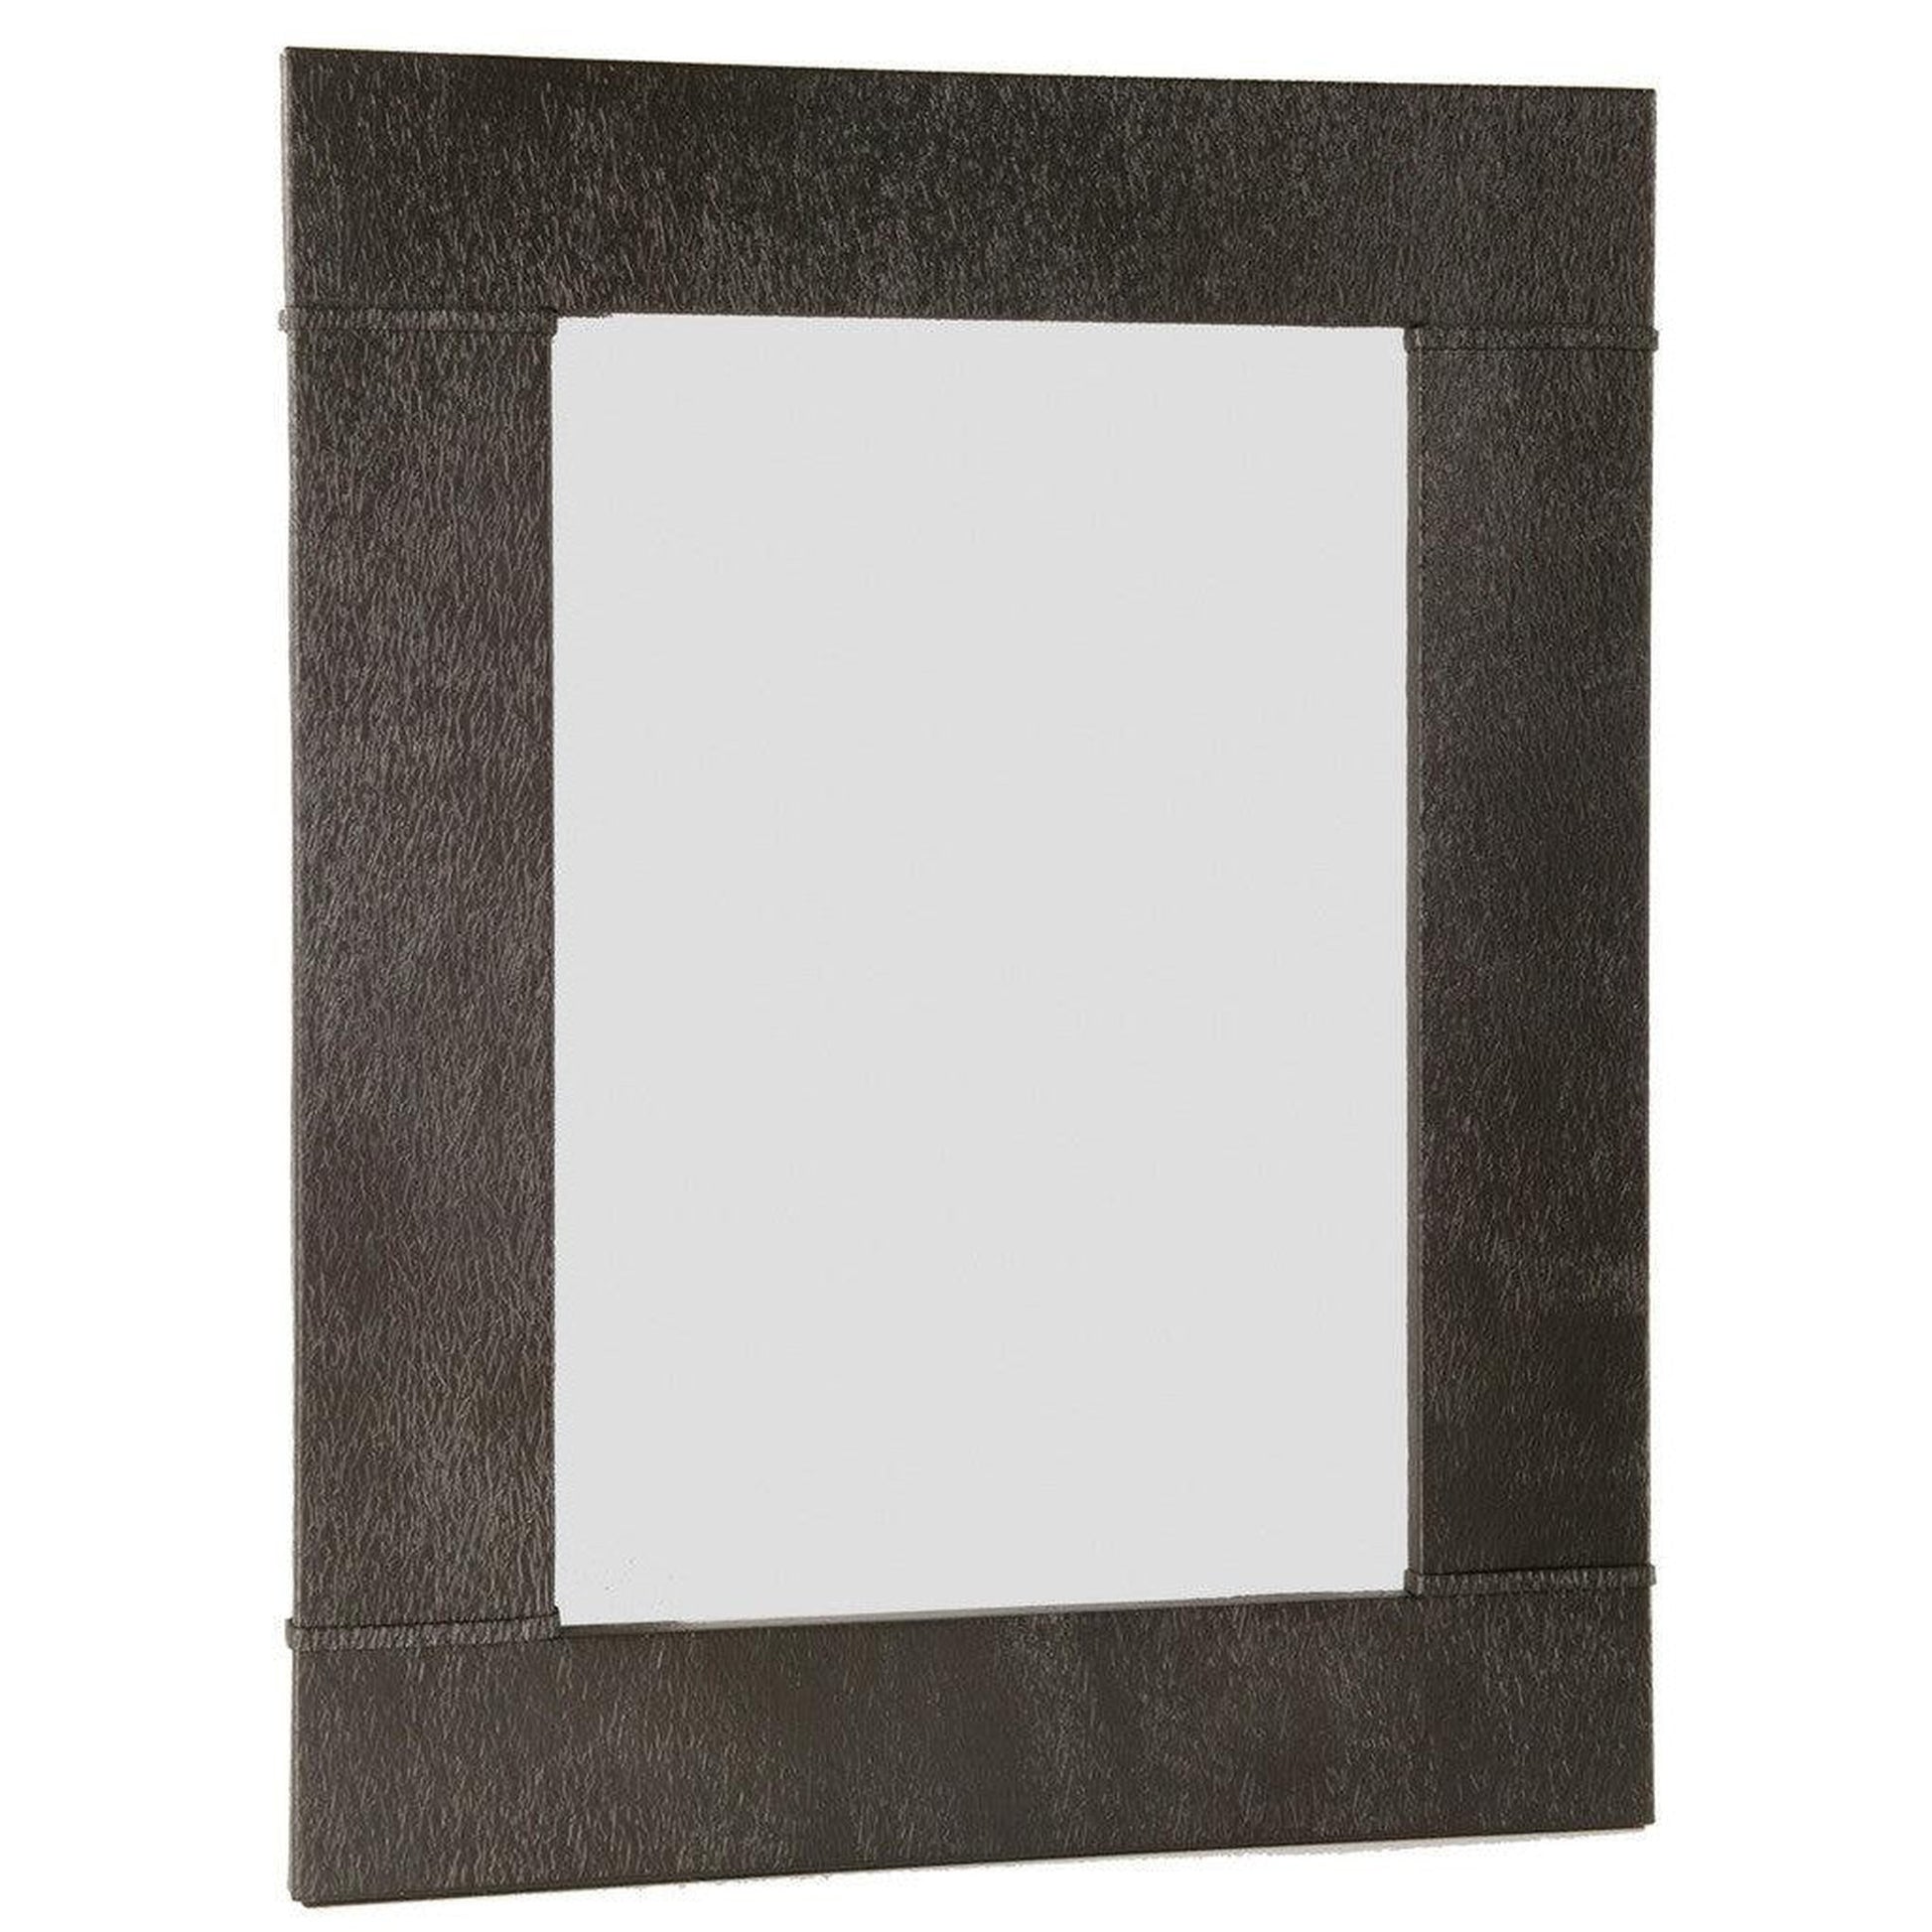 Stone County Ironworks Cedarvale 31" x 35" Small Burnished Gold Iron Wall Mirror With Gold Iron Accent